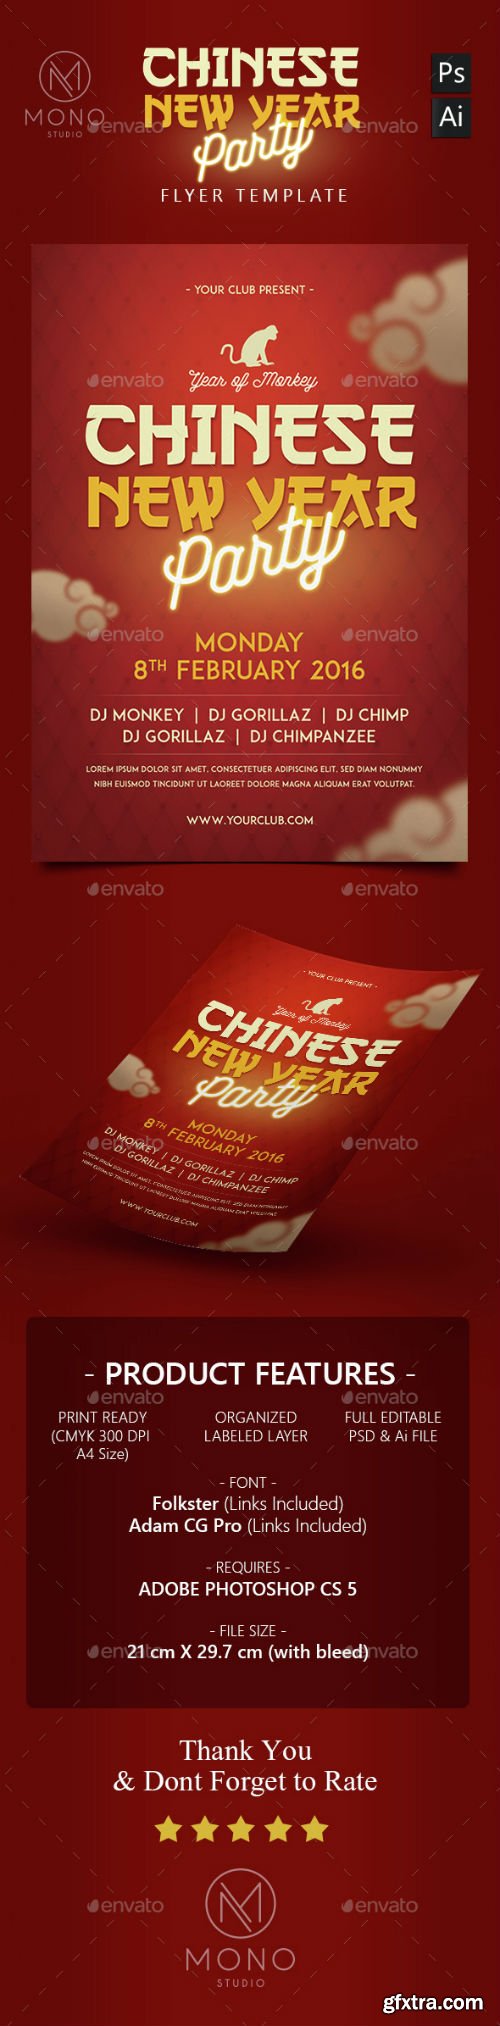 GR - Chinese New Year Flyer 14556635